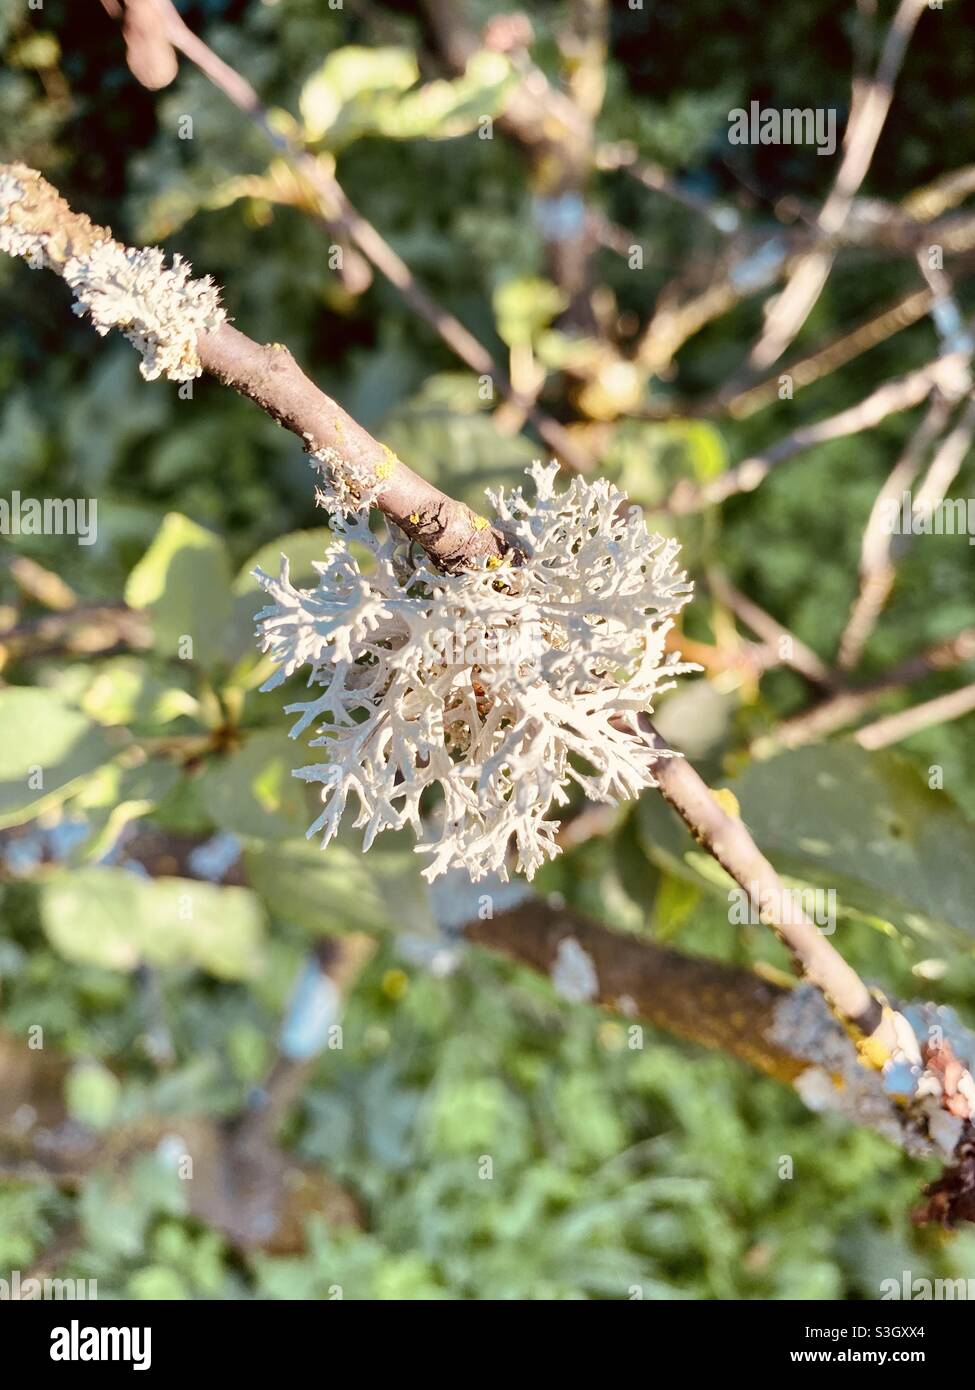 White lichen growing on a tree branch in the garden Stock Photo